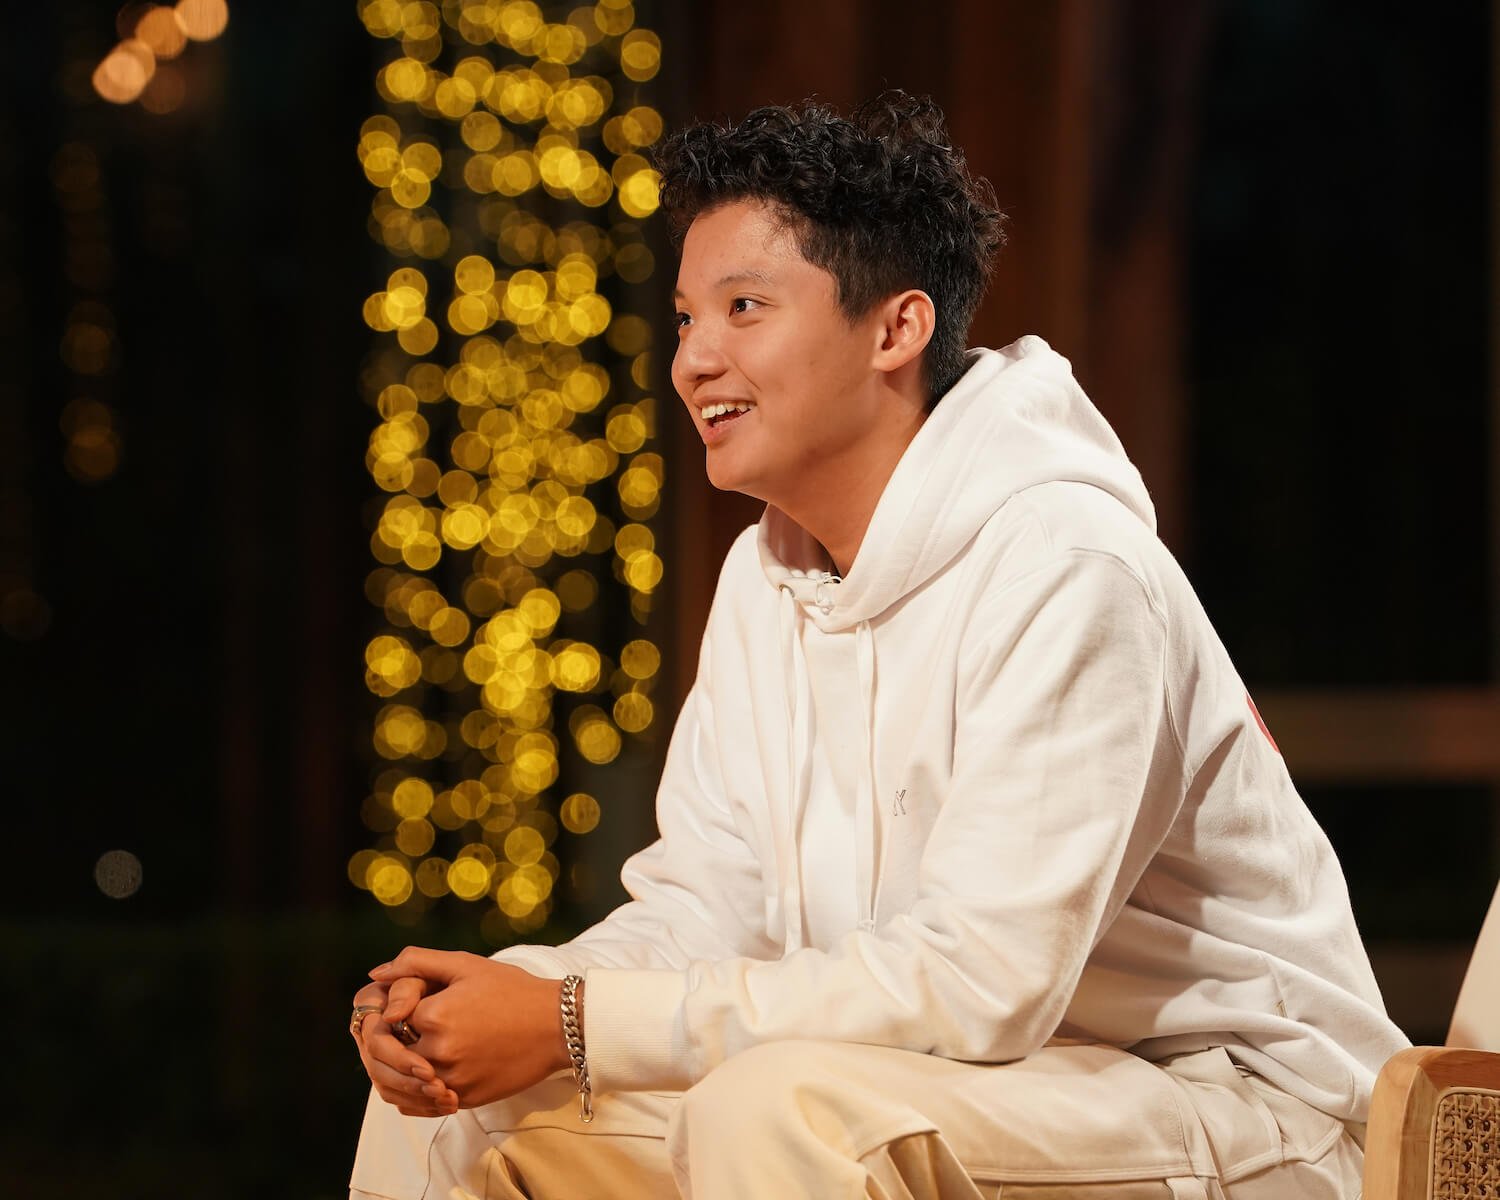 'American Idol' 2023 Platinum Ticket holder Tyson Venegas. 'American Idol' 2023 spoilers note Tyson moves on to the top 26.